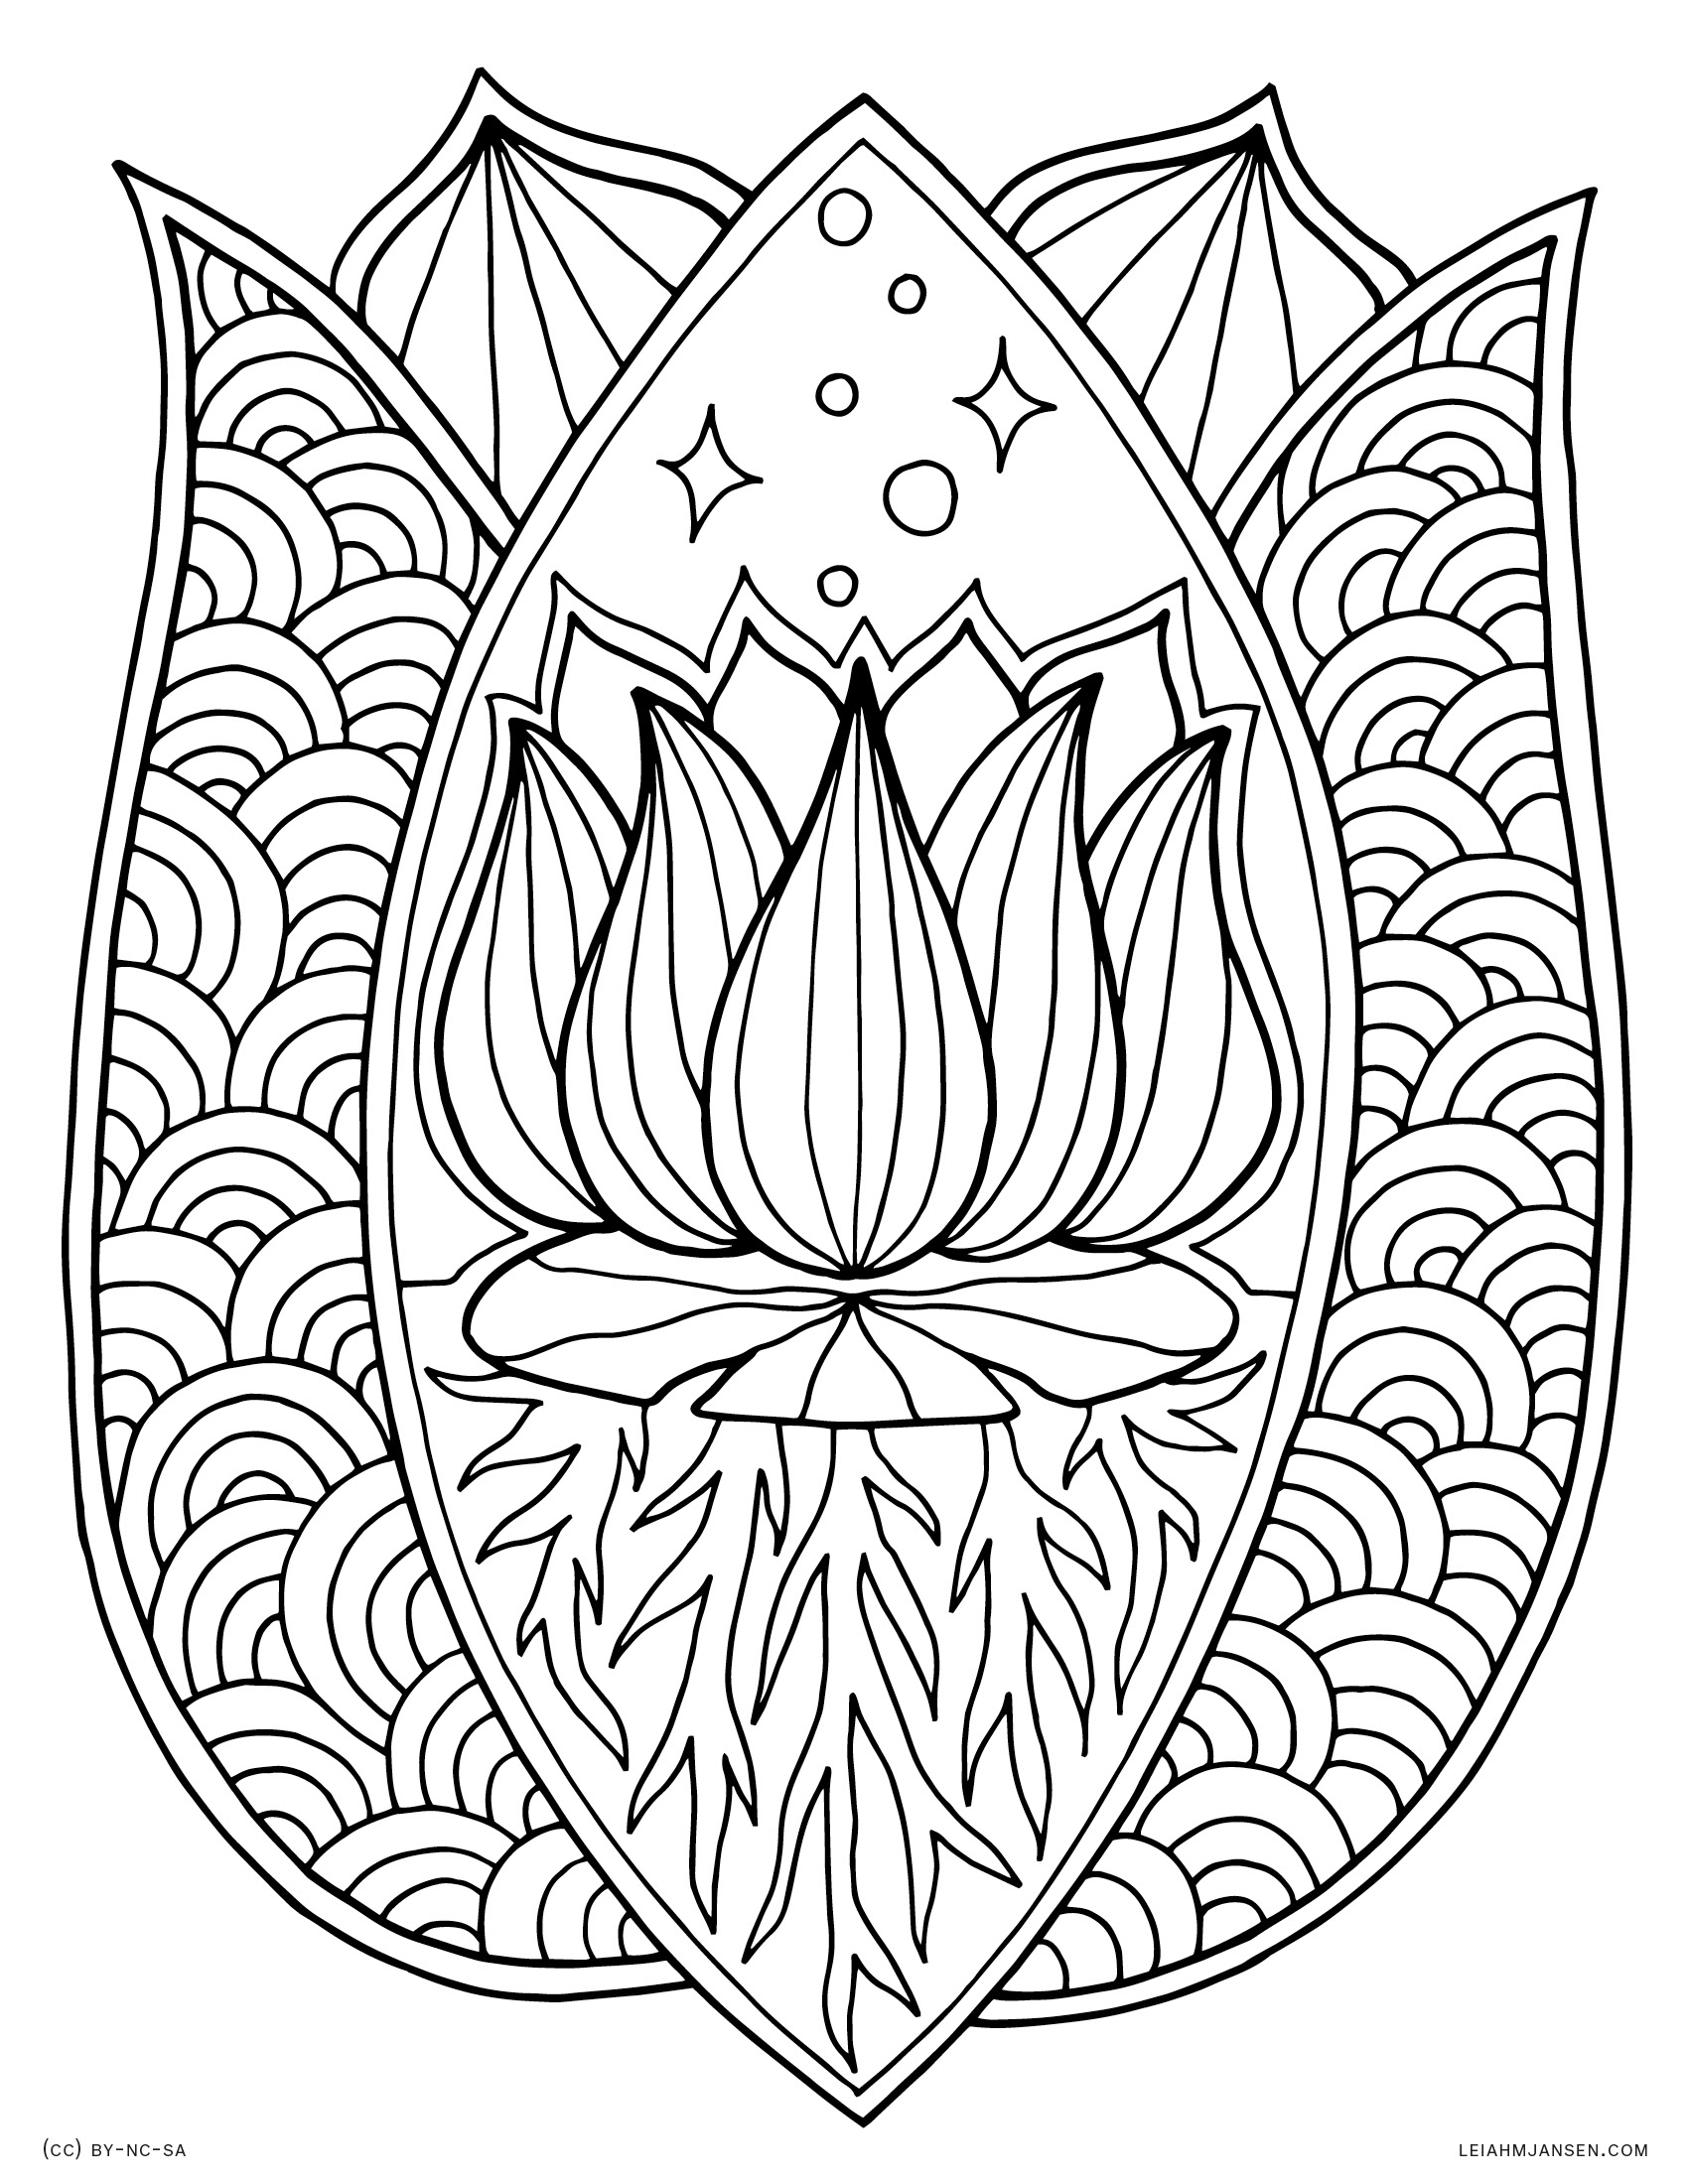 by Lotus Roots Decorative Lotus Flower in the Mud Free Printable Coloring Page for Adults